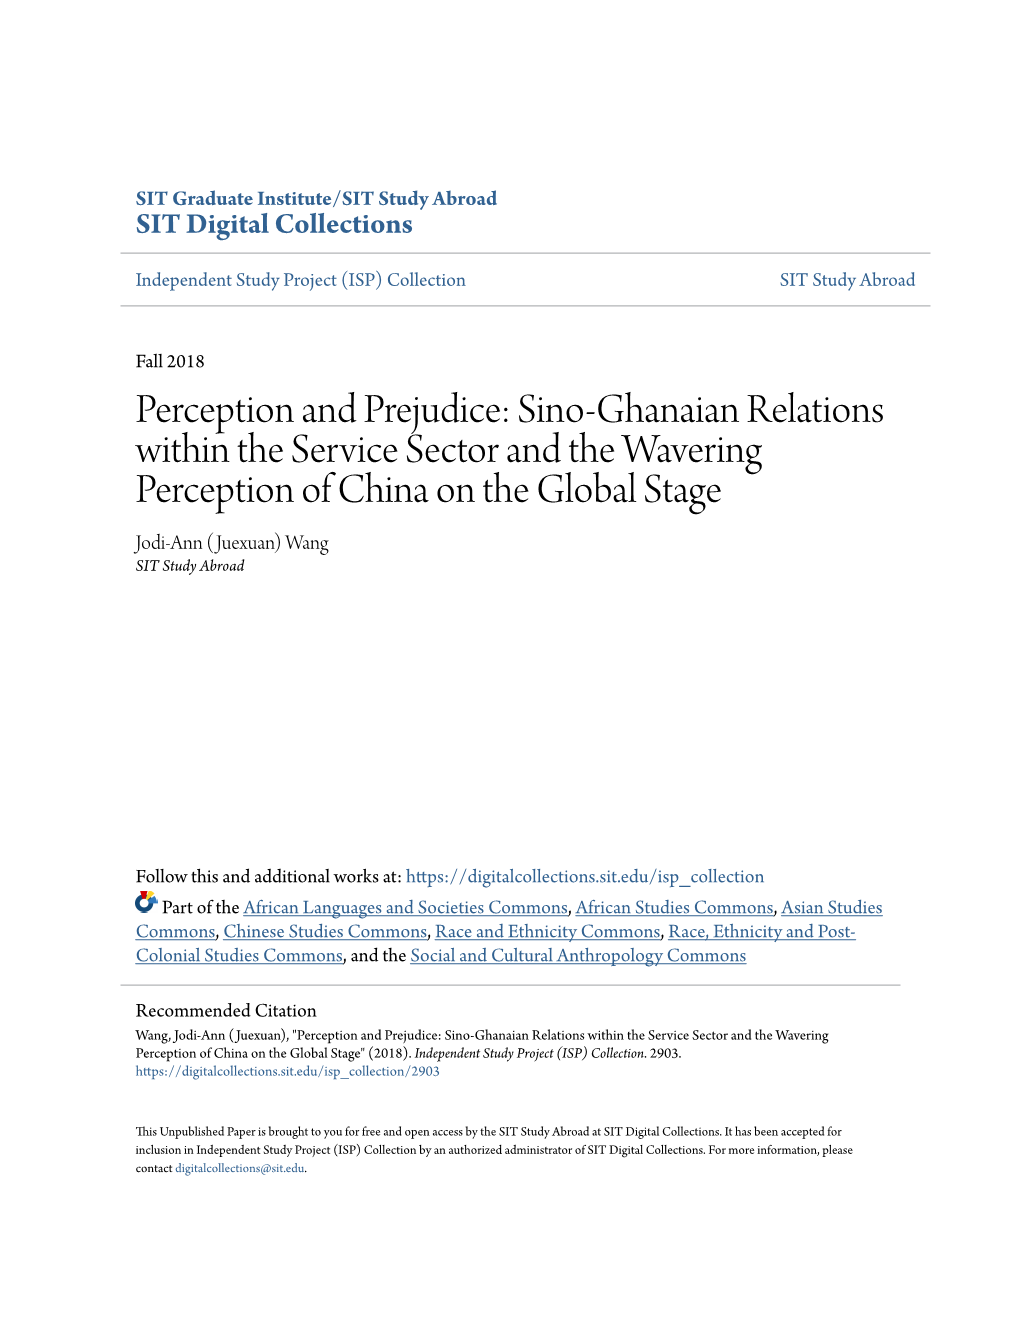 Perception and Prejudice: Sino-Ghanaian Relations Within The